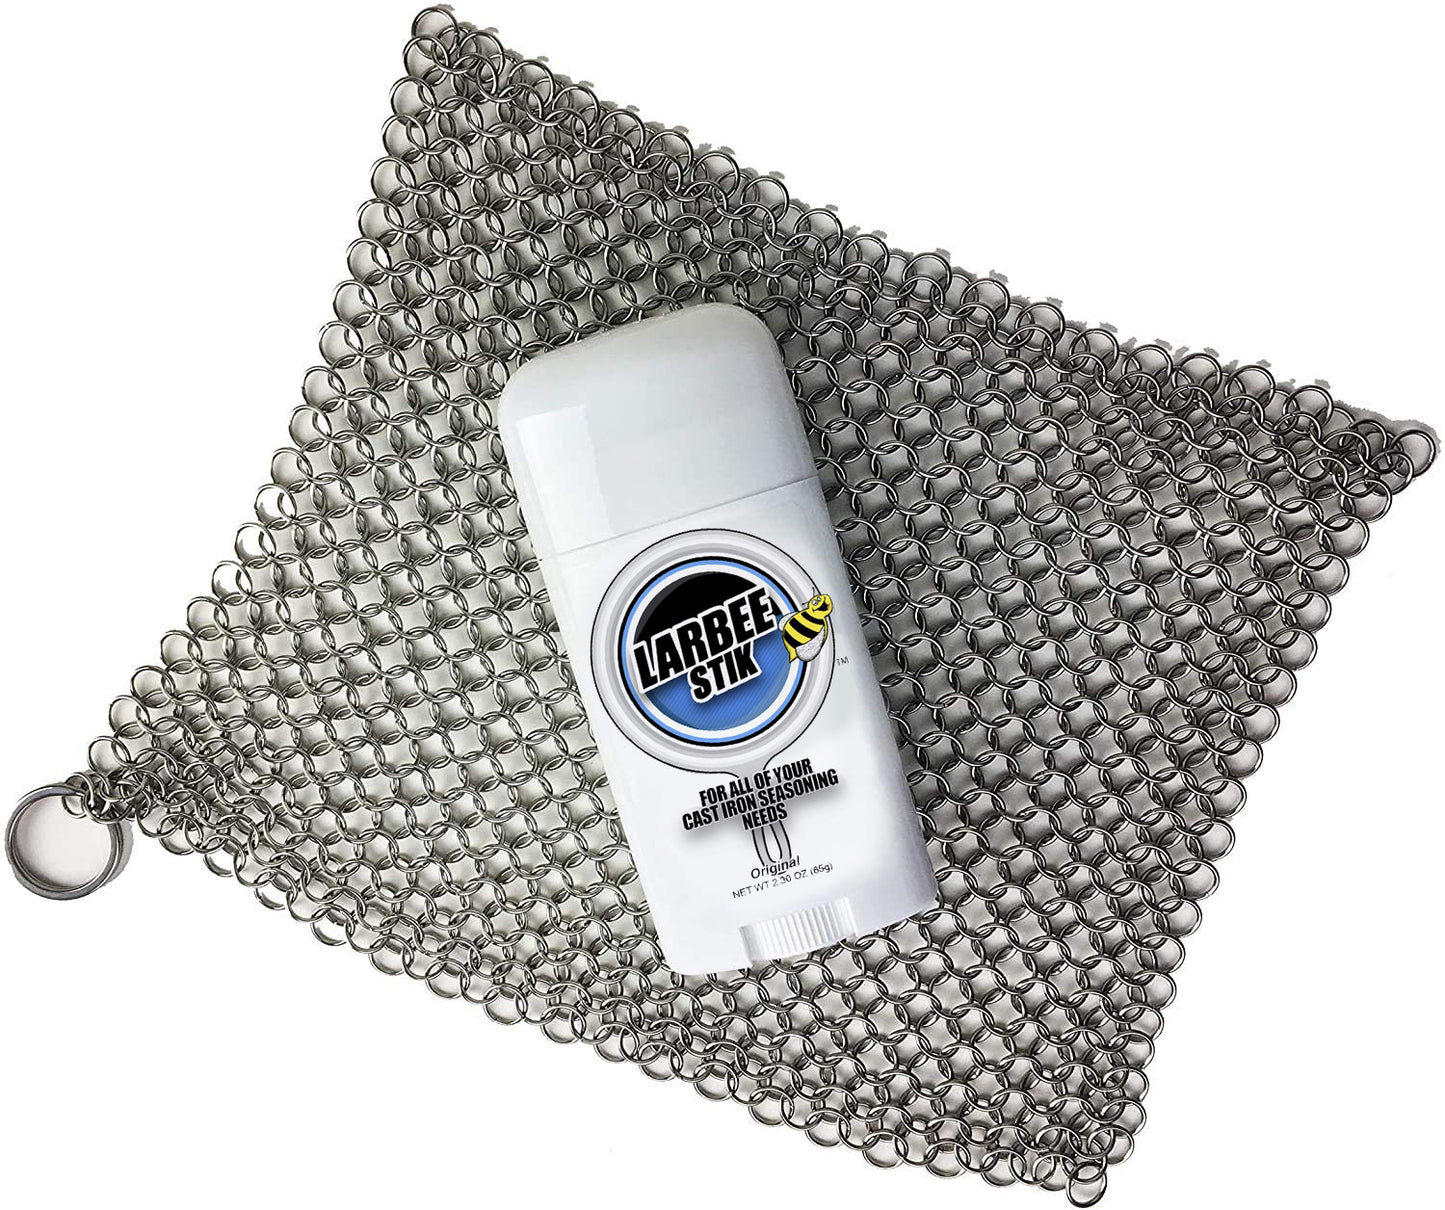 Cast Iron Cleaner Combo - Crisbee Stik® & Chain Mail Scrubber